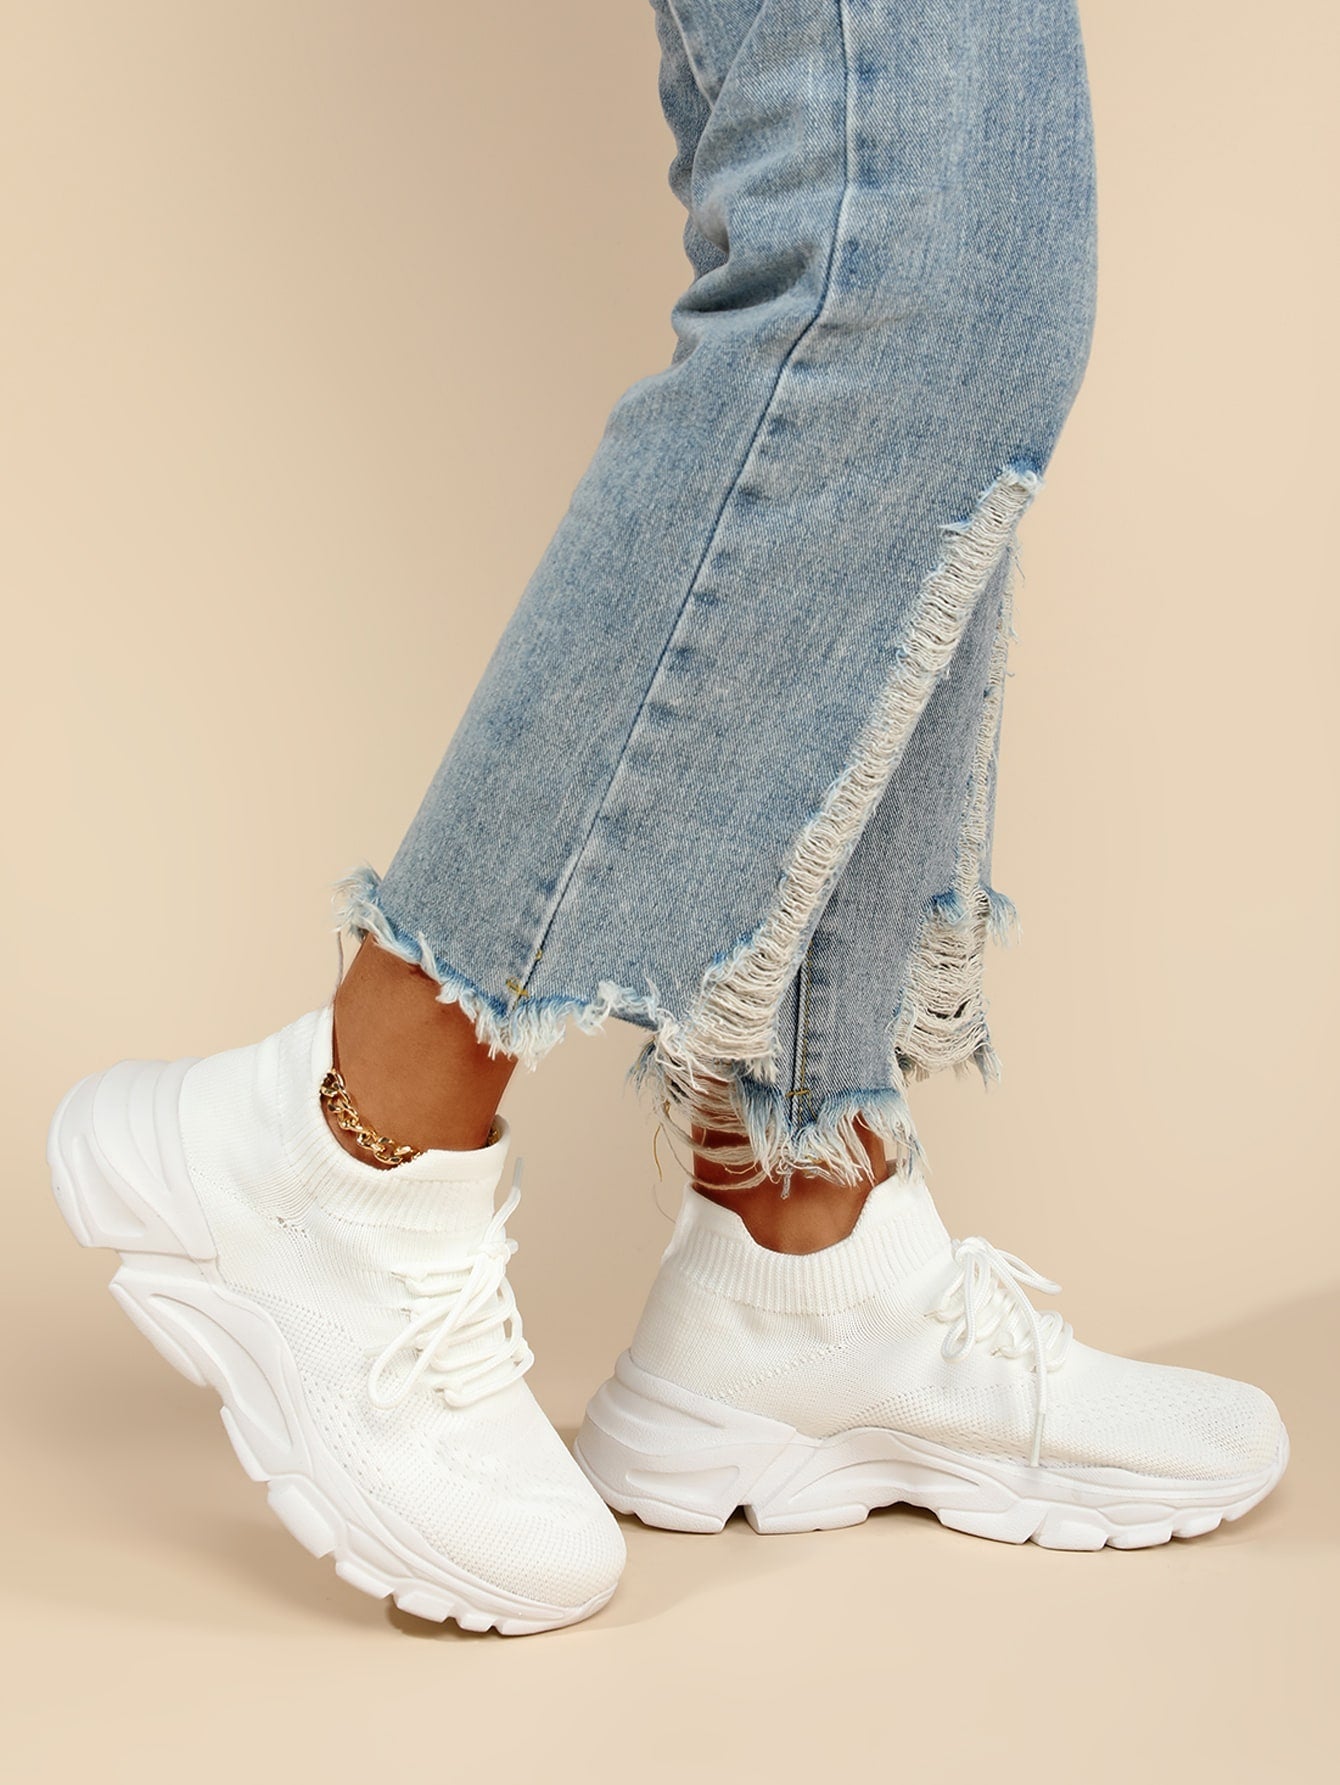 Lace-up Front High Top Chunky Sneakers, White Color Running Shoes With Solid Color Shoelaces For Women - Negative Apparel